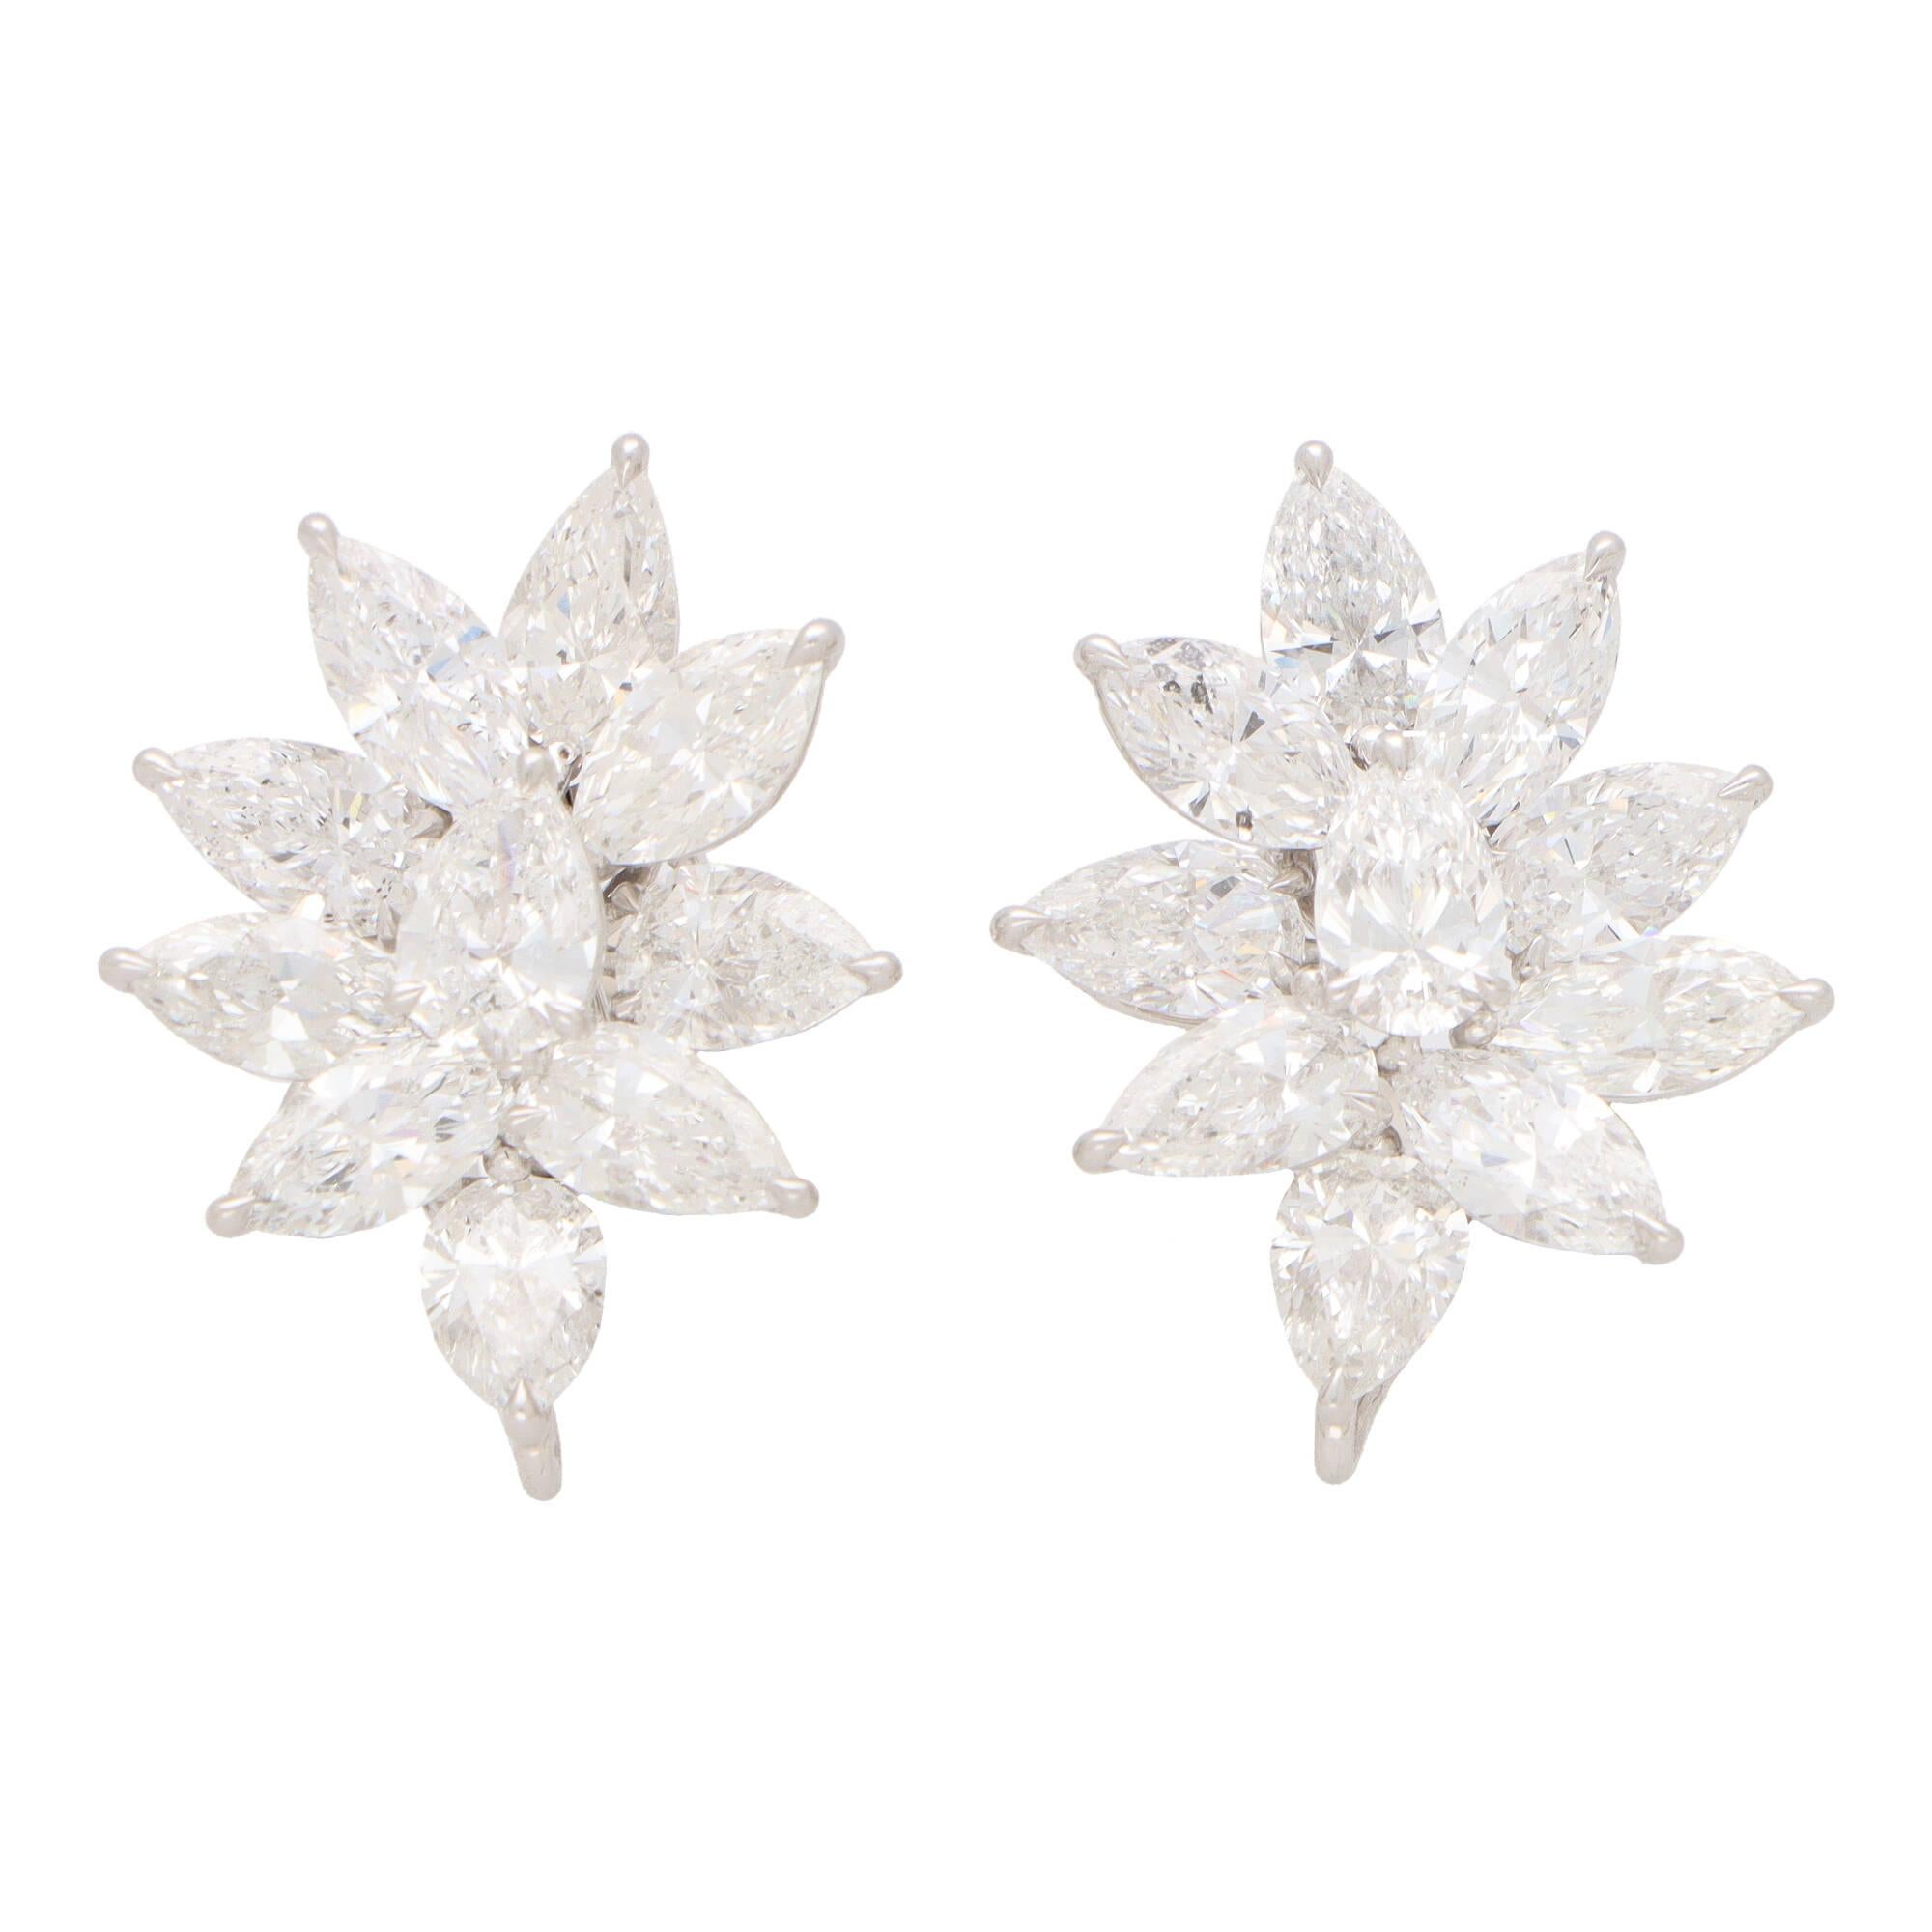 Modern Pear and Marquise Cut Diamond Floral Cluster Earrings Set in Platinum